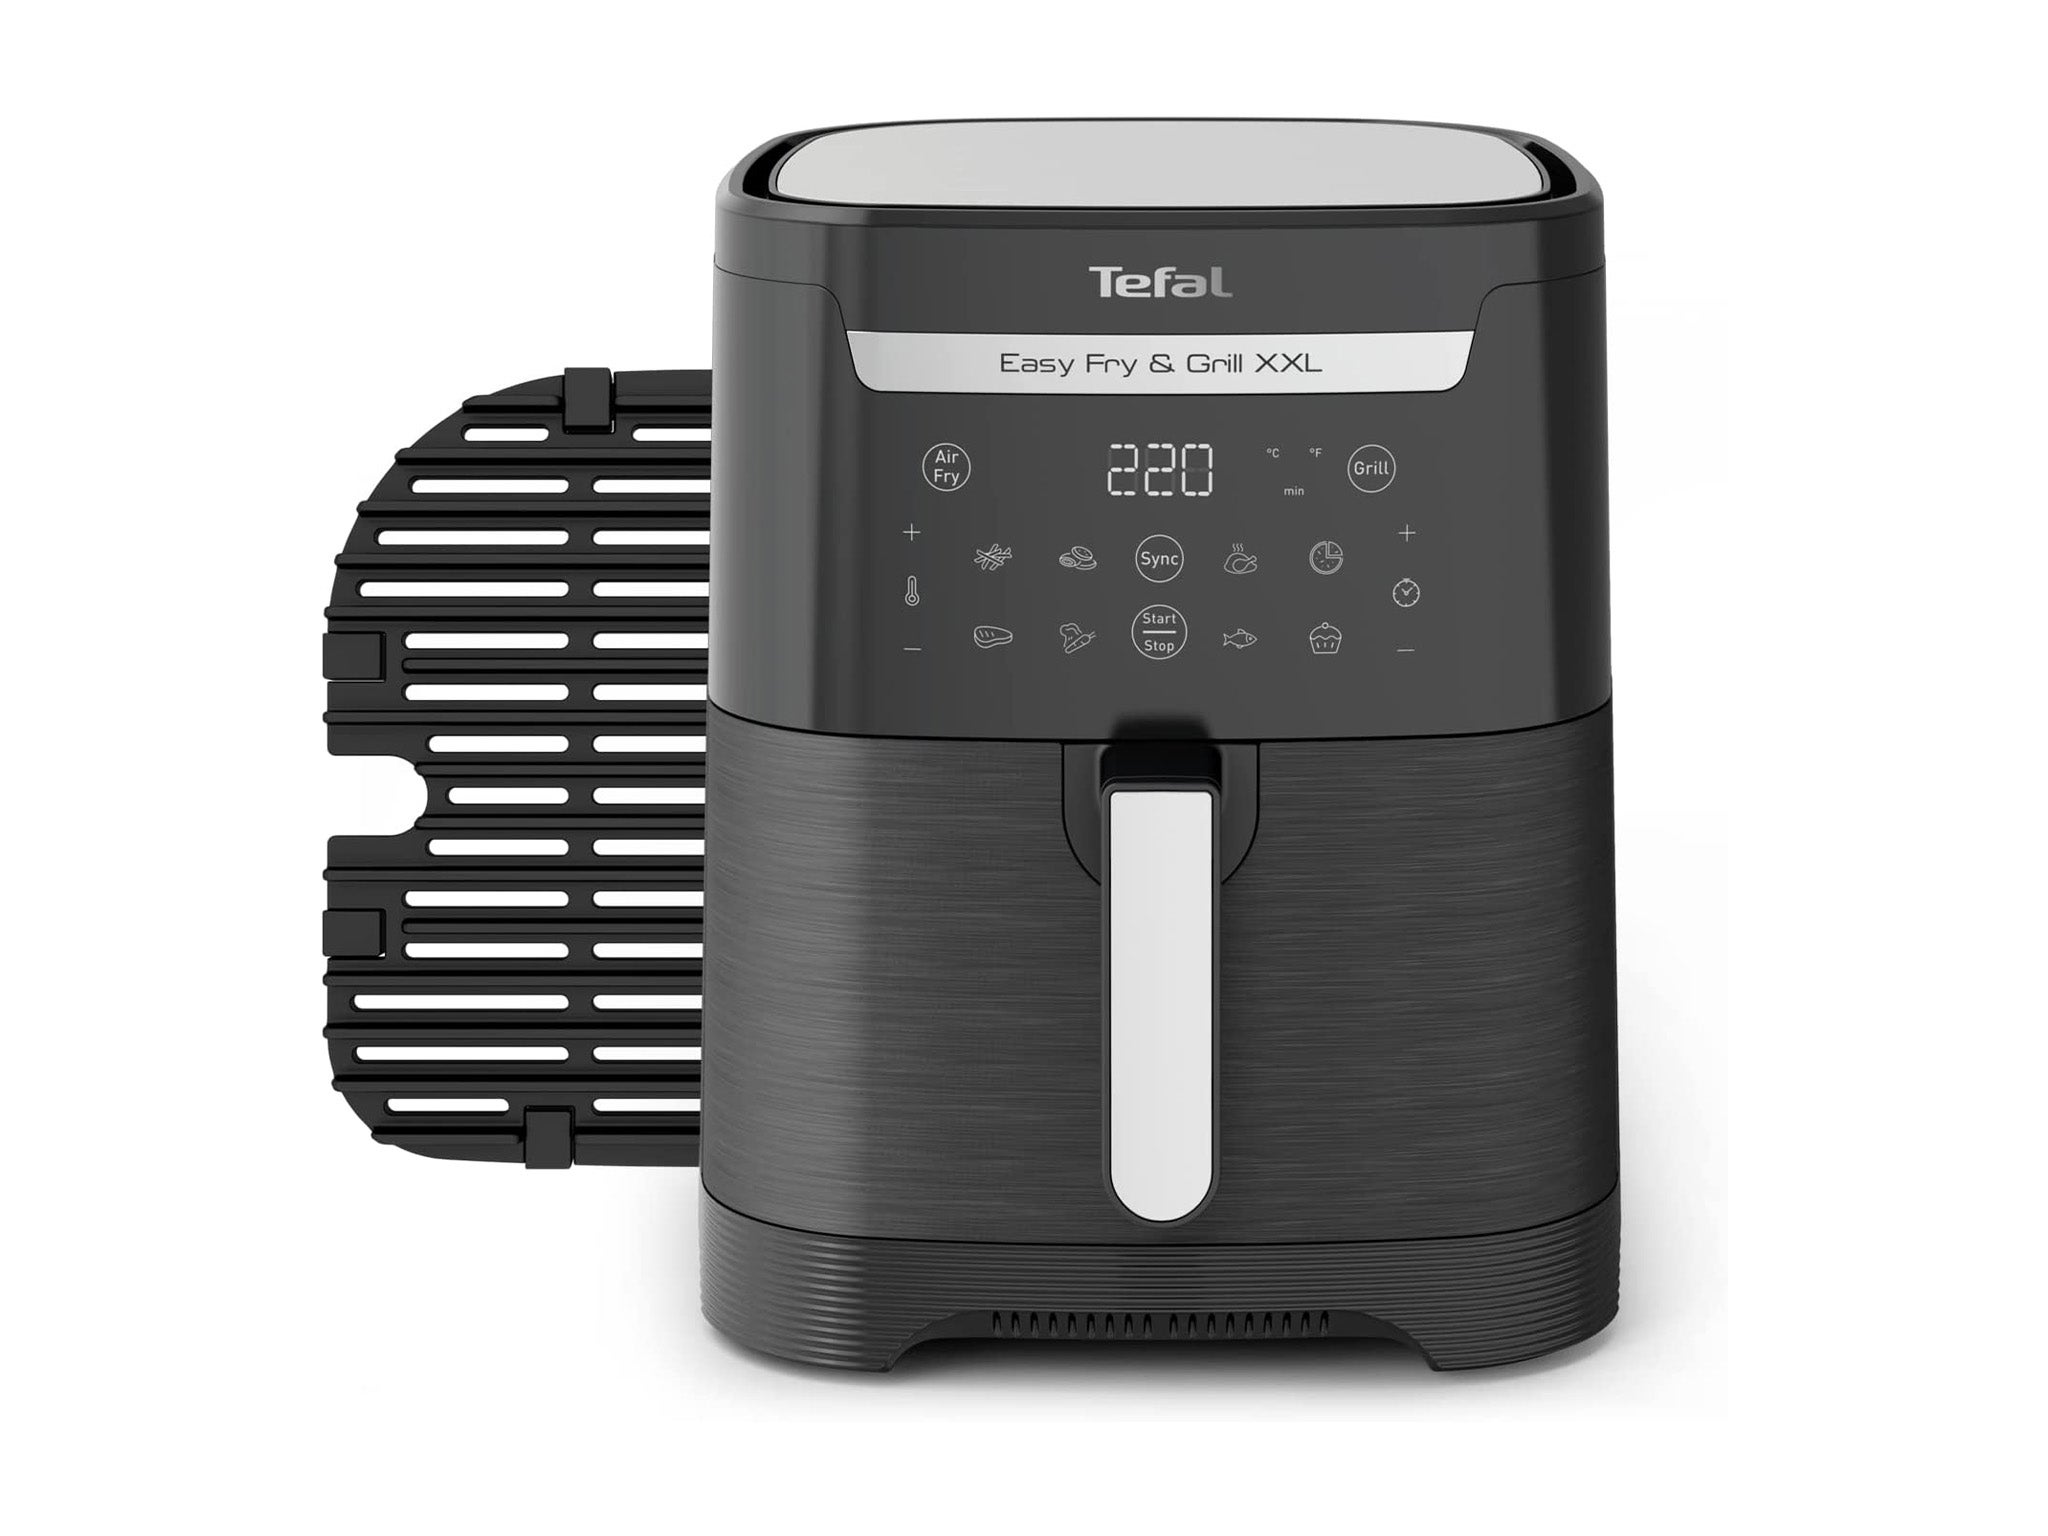 https://static.independent.co.uk/2023/02/23/14/Tefal%20XXL%20airfryer.jpg